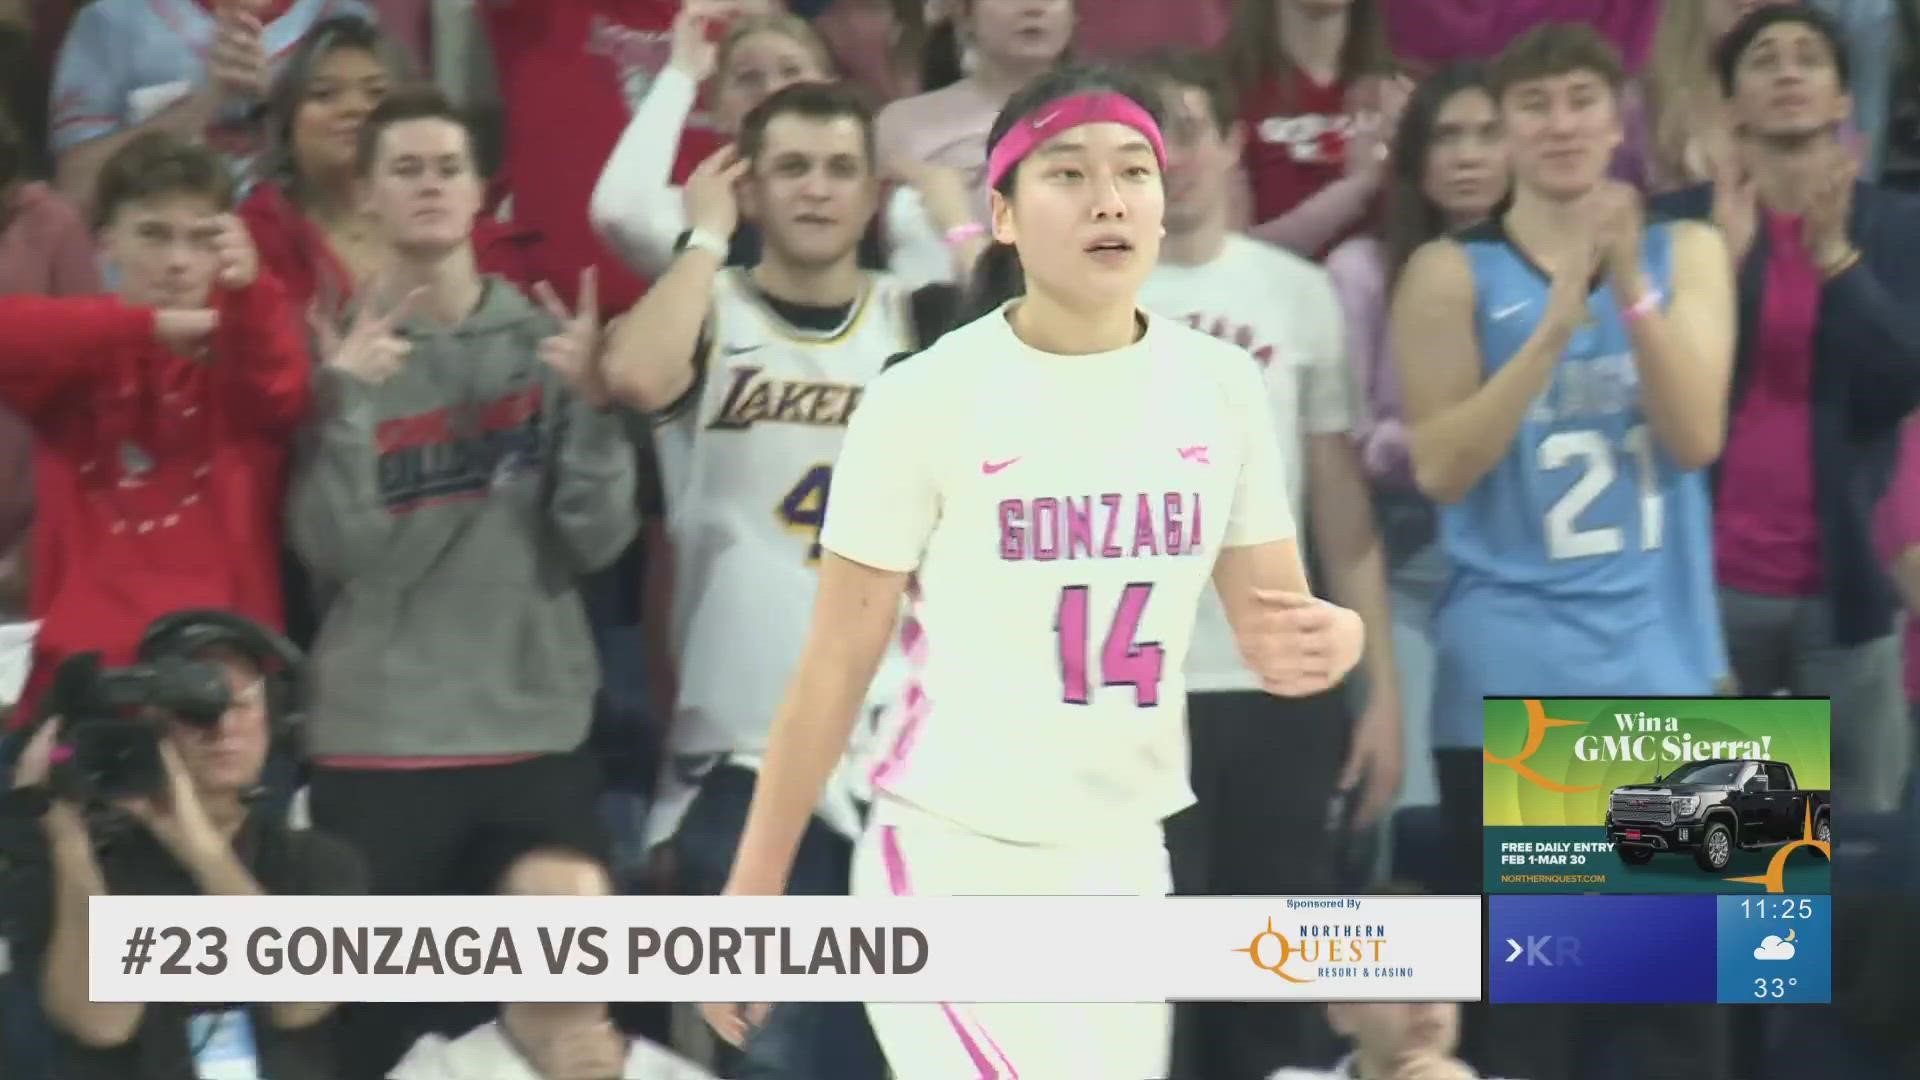 Kaylynne Truong scored 20 points to lead No. 23 Gonzaga to a 63-53 win over Portland to snap a first-place with the Pilots on a Saturday.